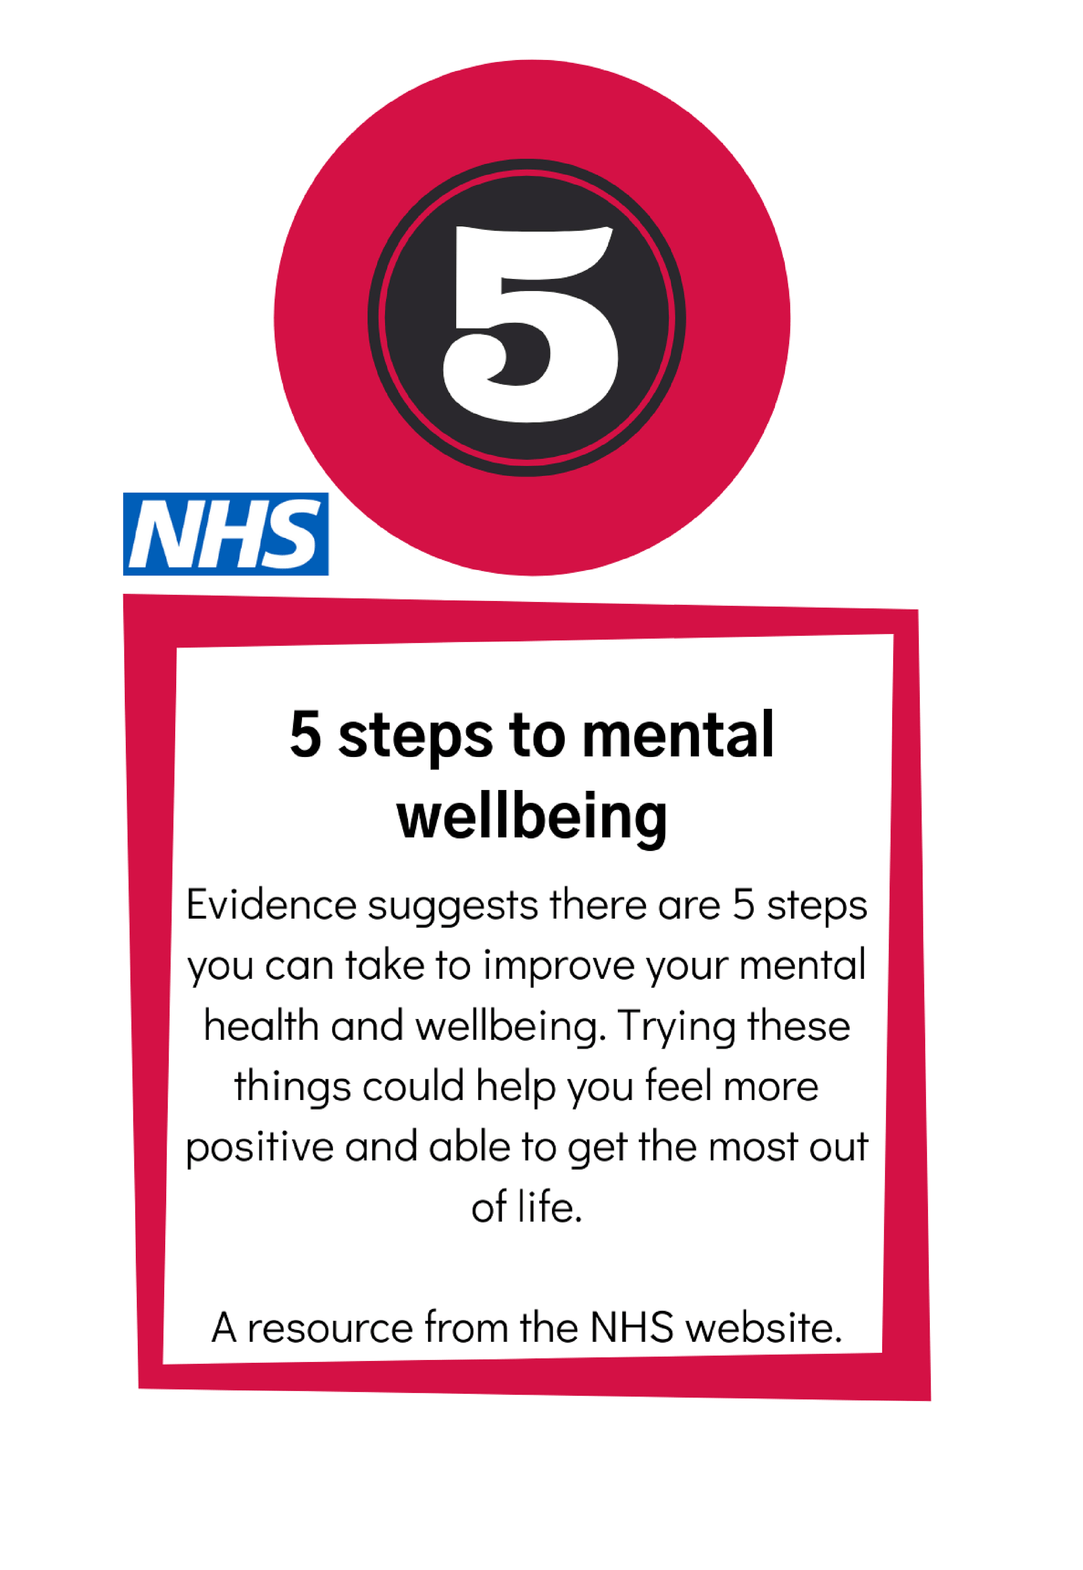 5 steps to mental wellbeing